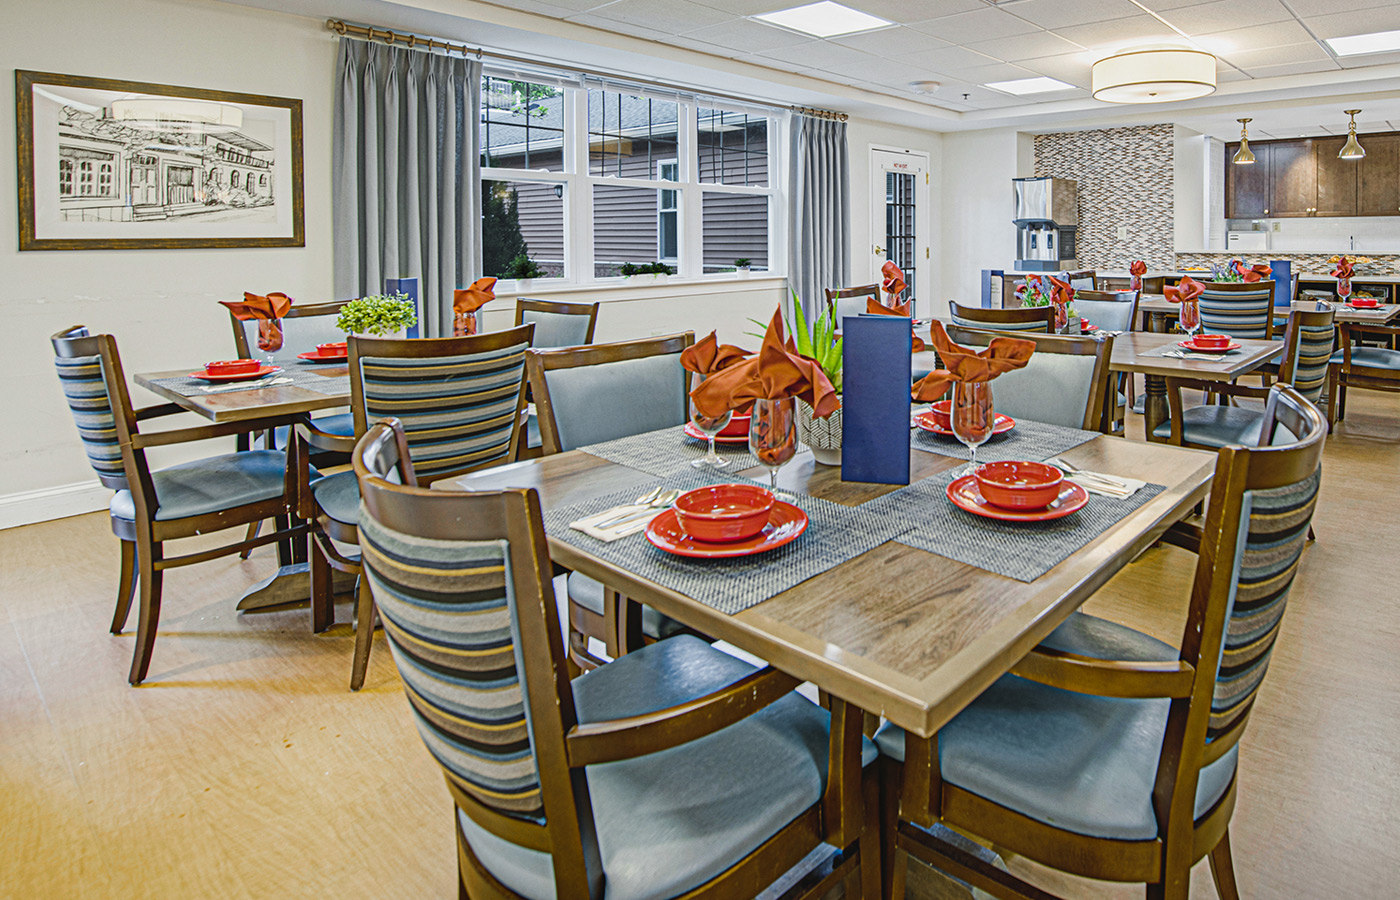 A dining area in a community.